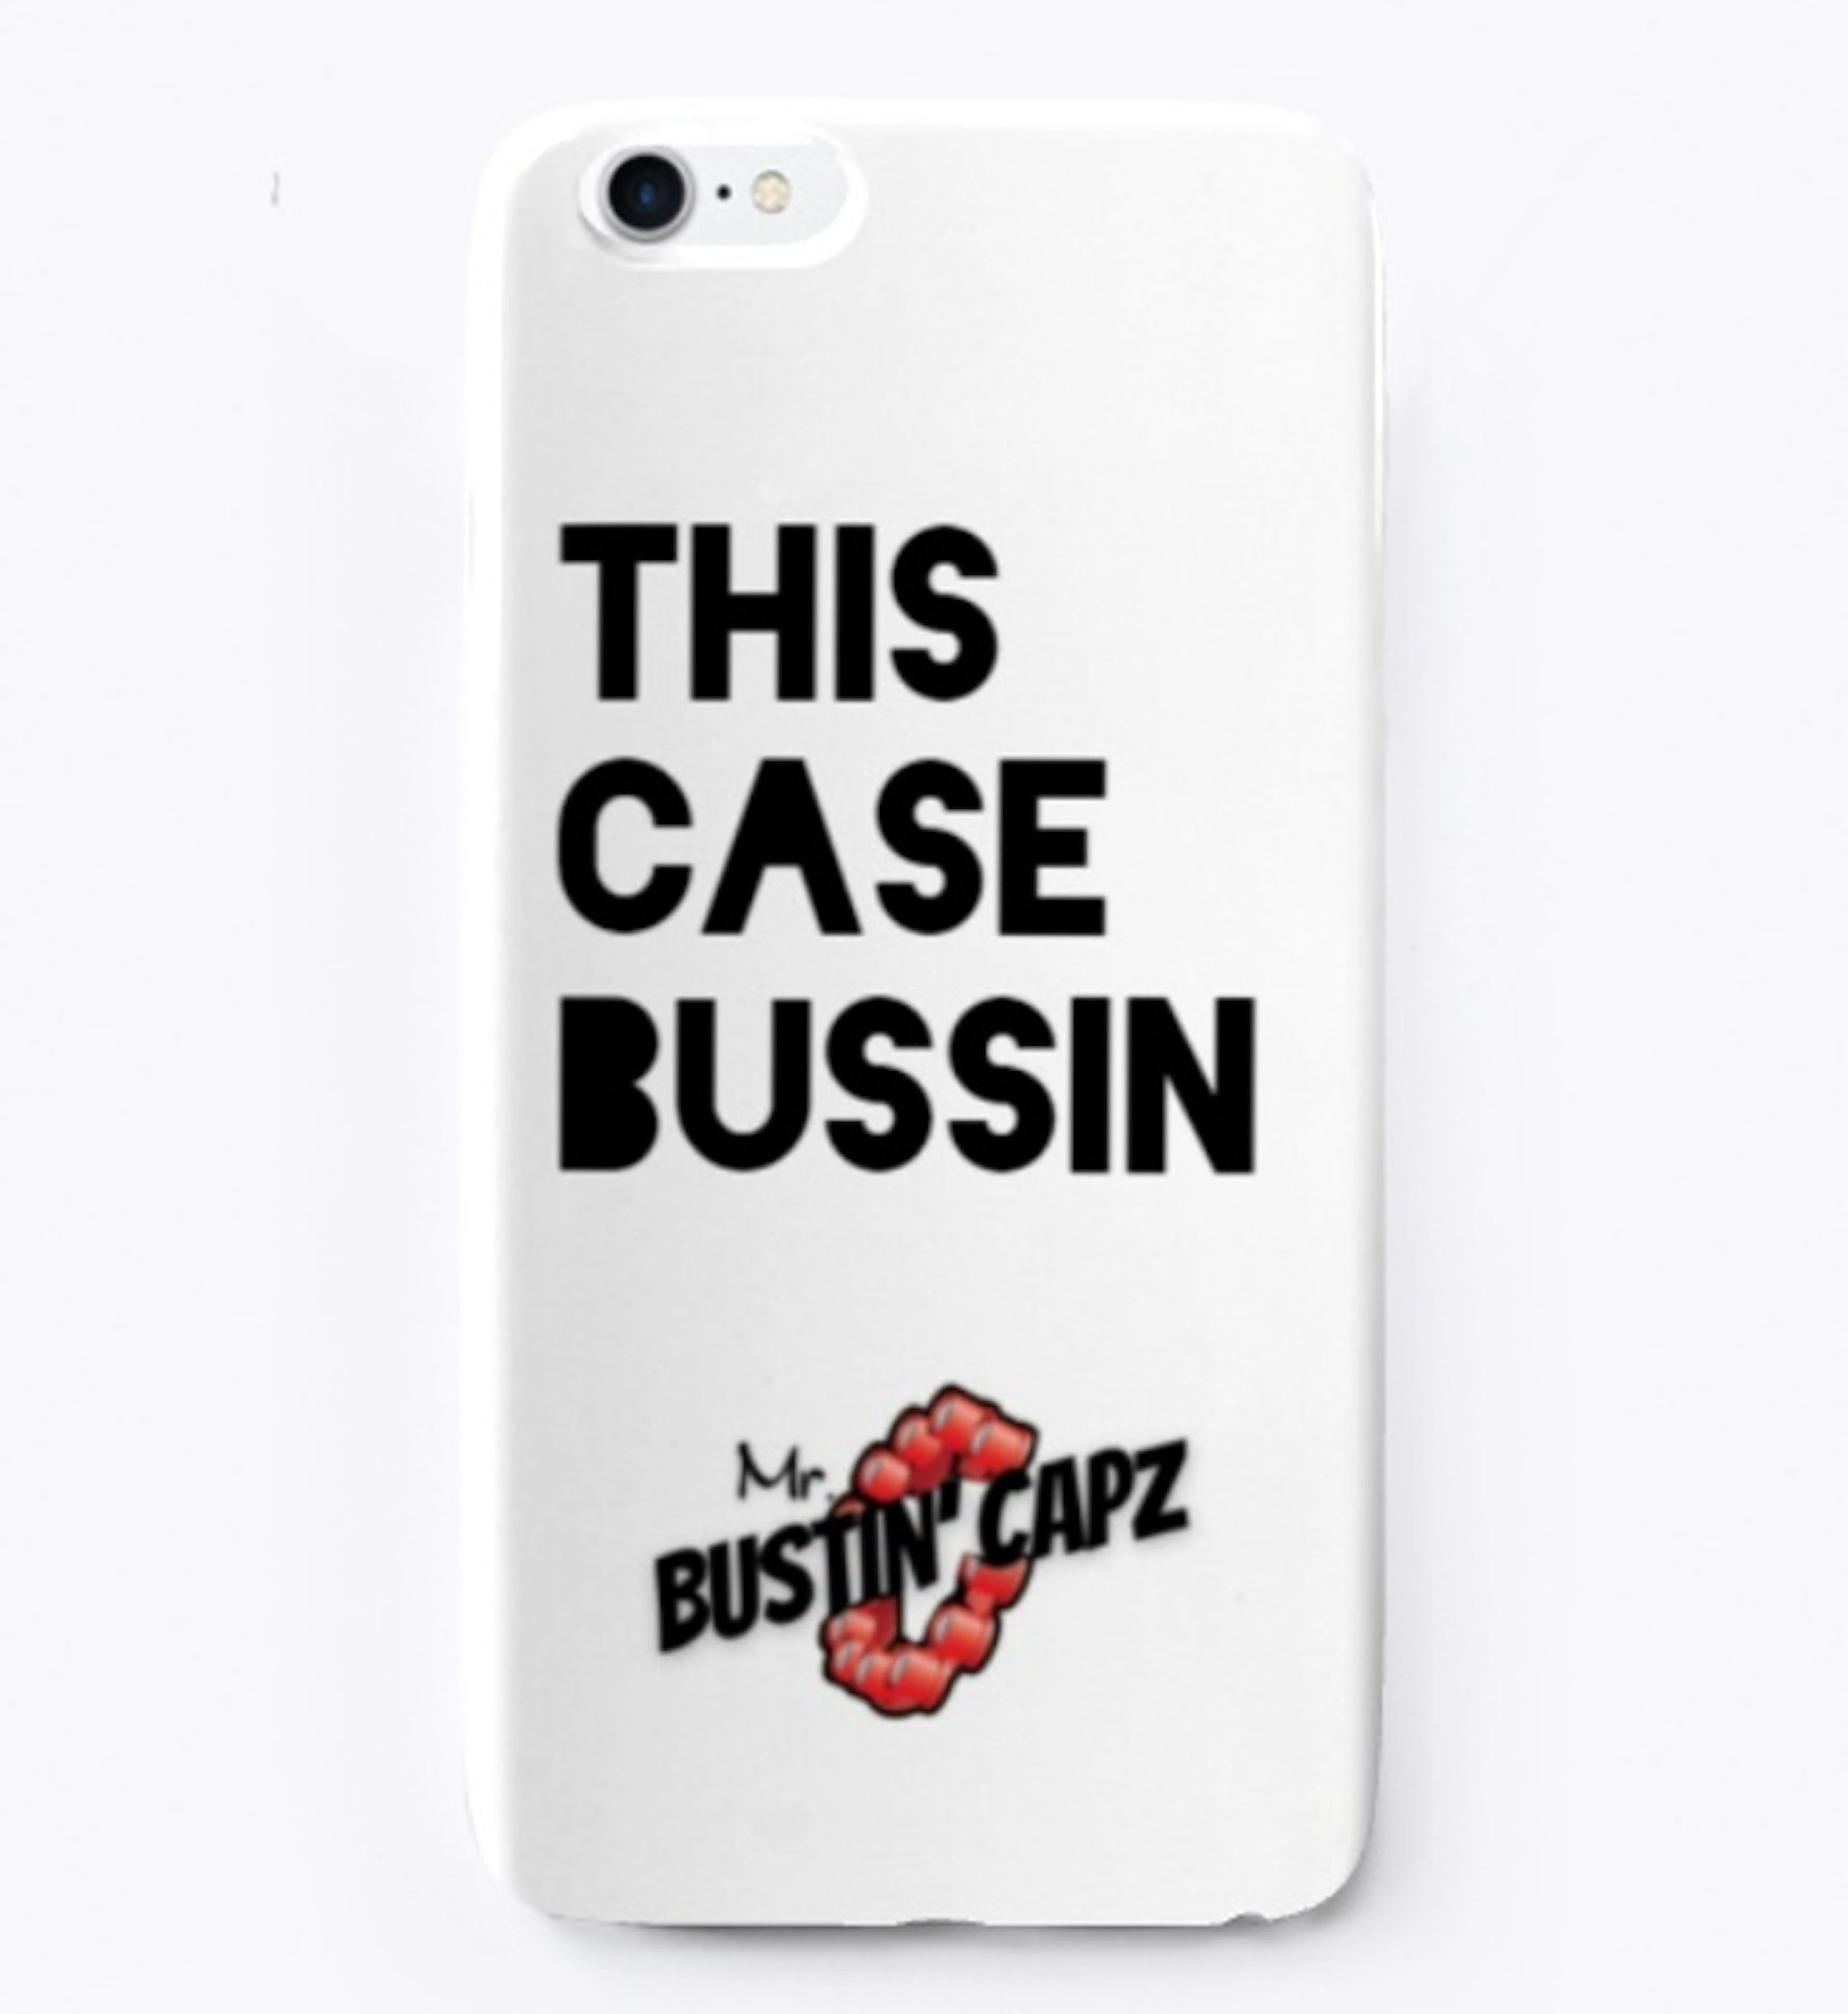 This Case Bussin. MBC